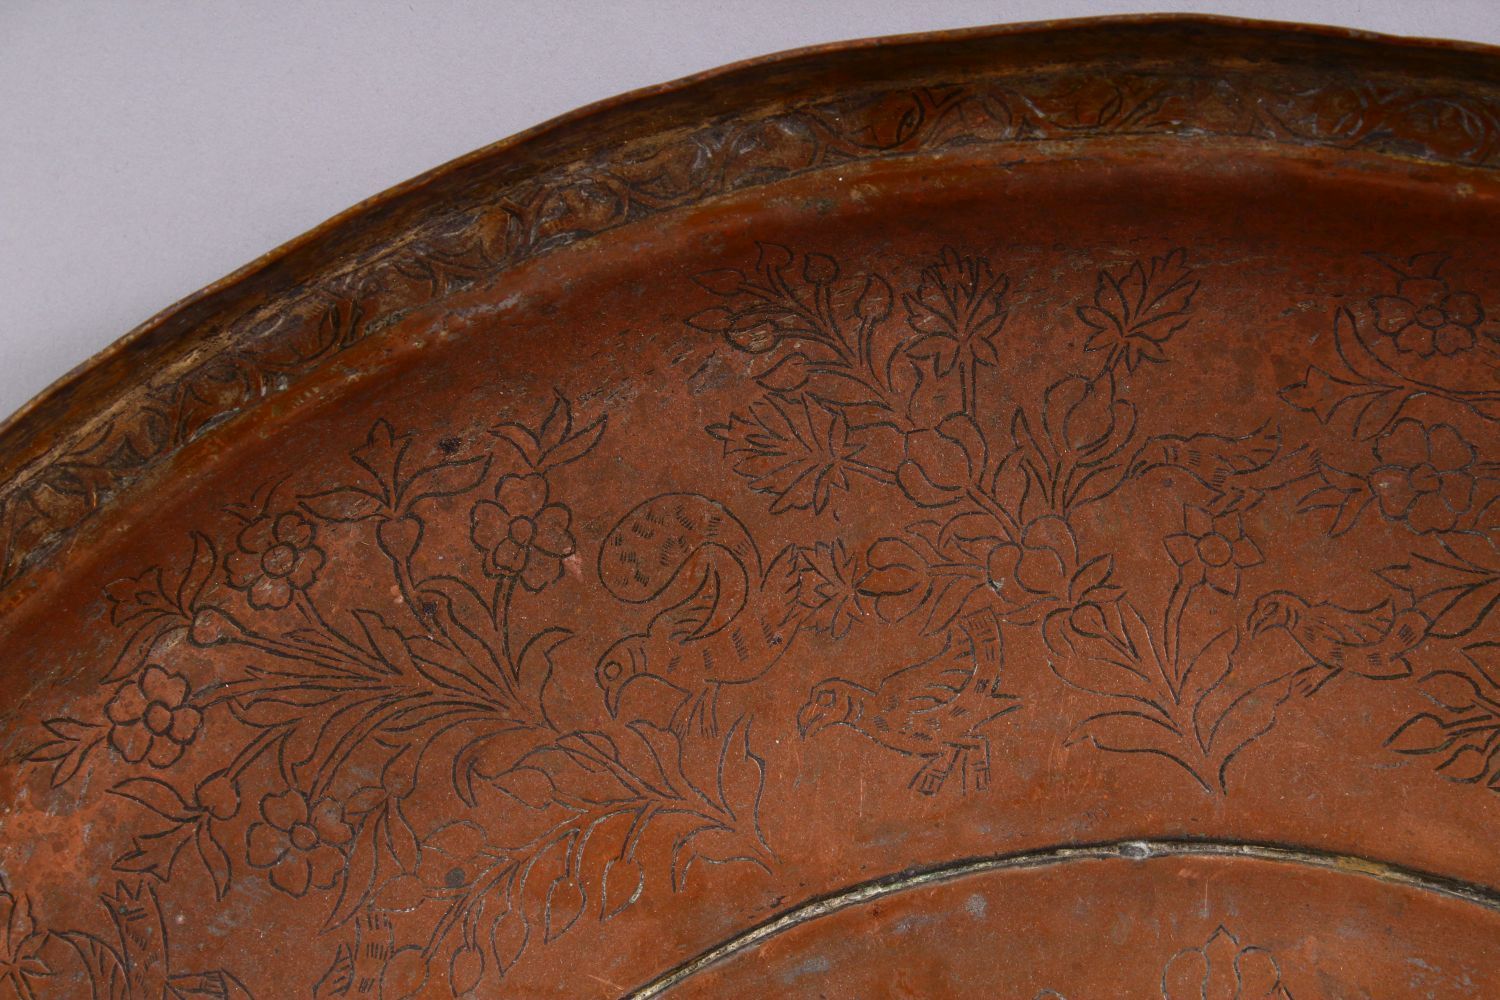 A LARGE SILVERED COPPER PERSIAN BOWL, the bowl with floral motif decoration. 46.5cm. - Image 3 of 6